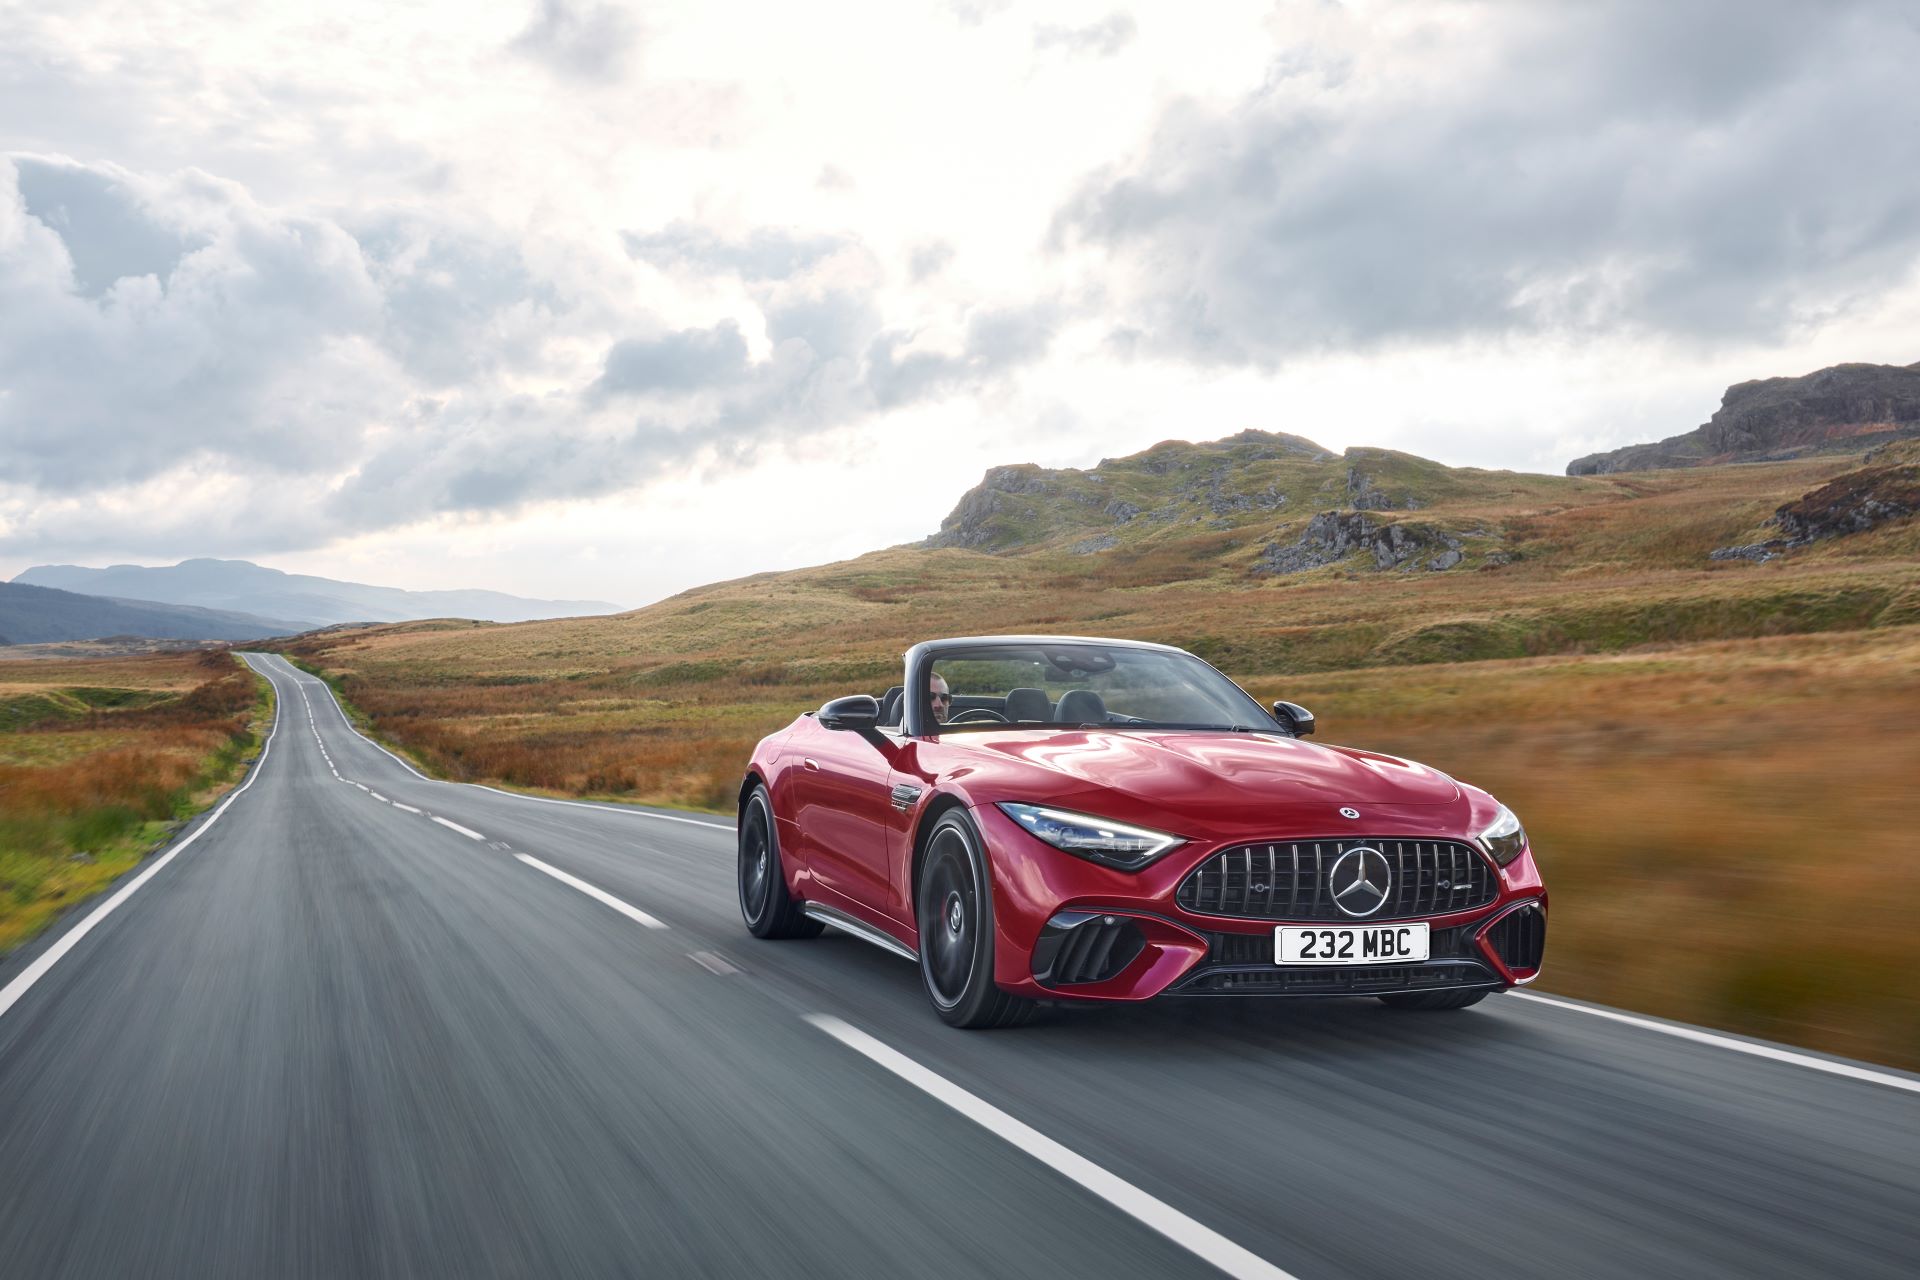 Mercedes-AMG SL wins The Sunday Times ‘Legend Car of The Year’ Award